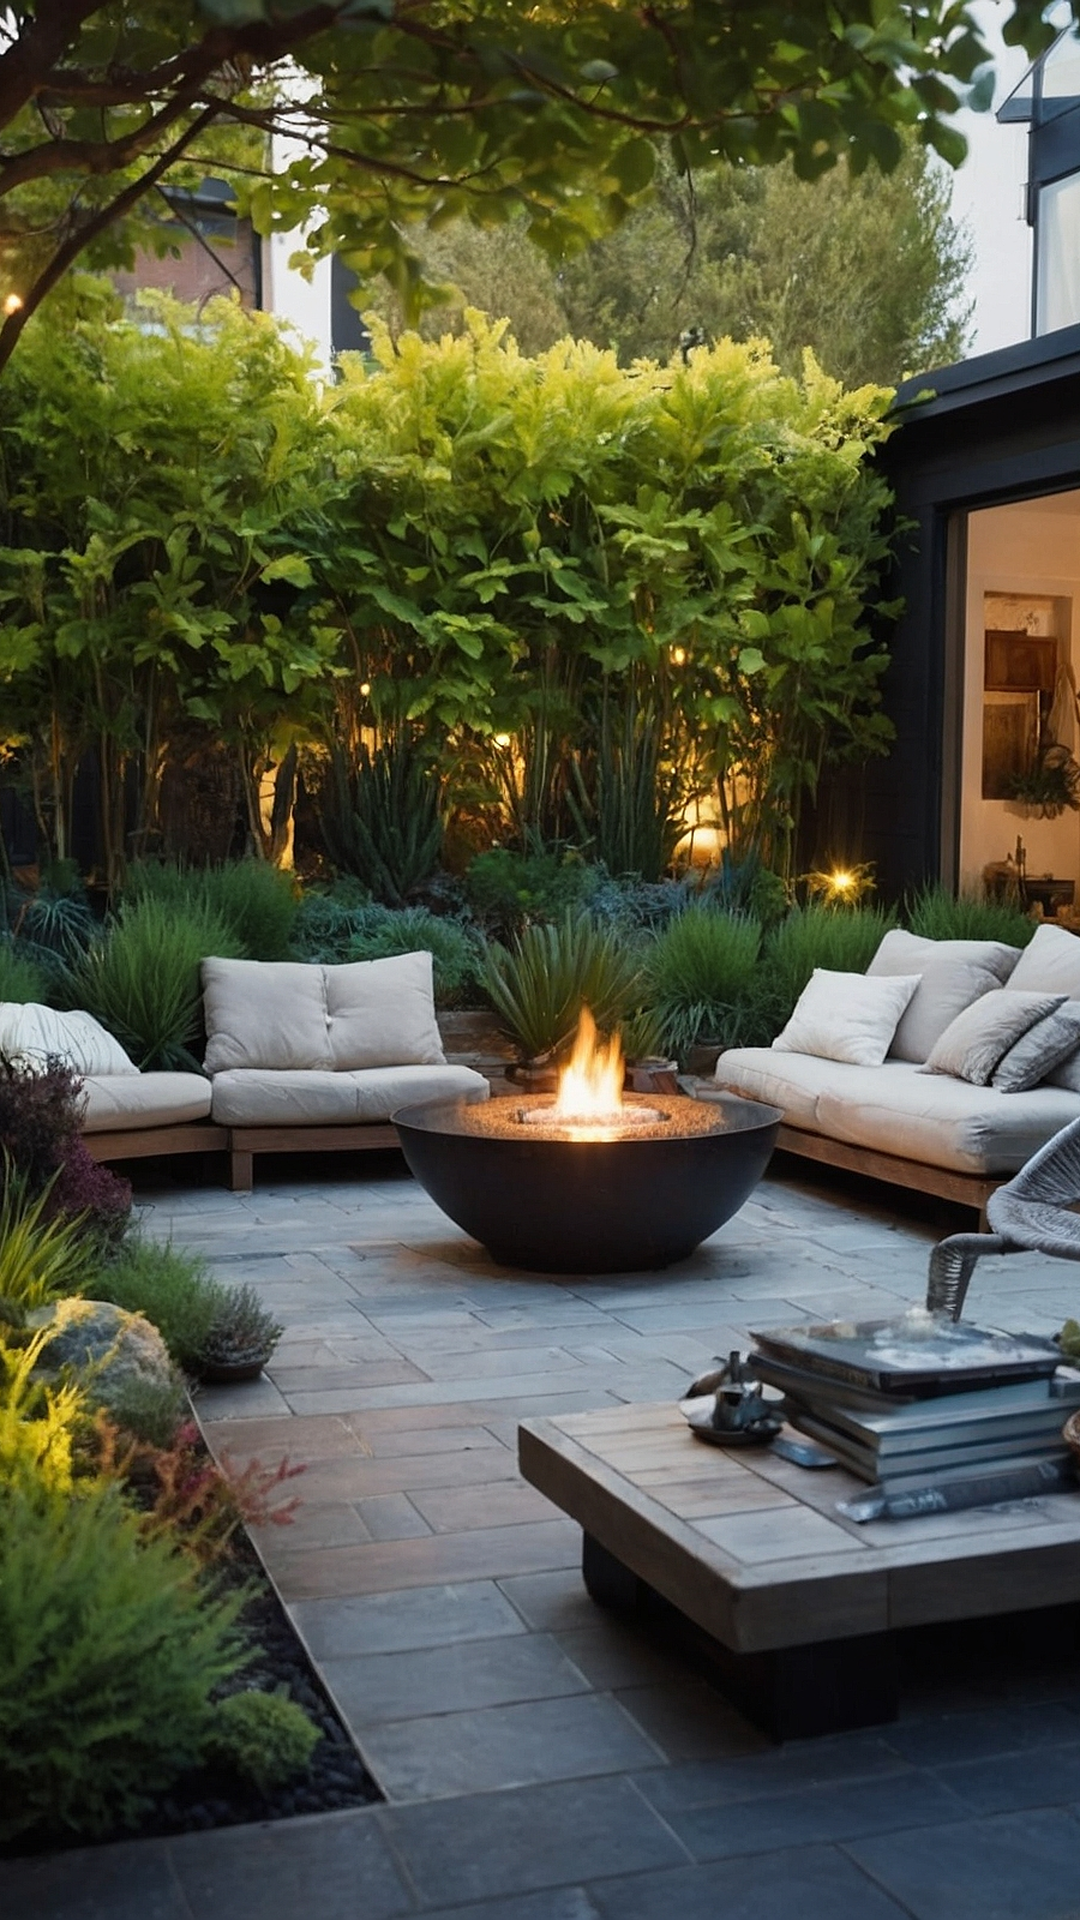 Making the Most of a Small Garden: Layout and Design Ideas.